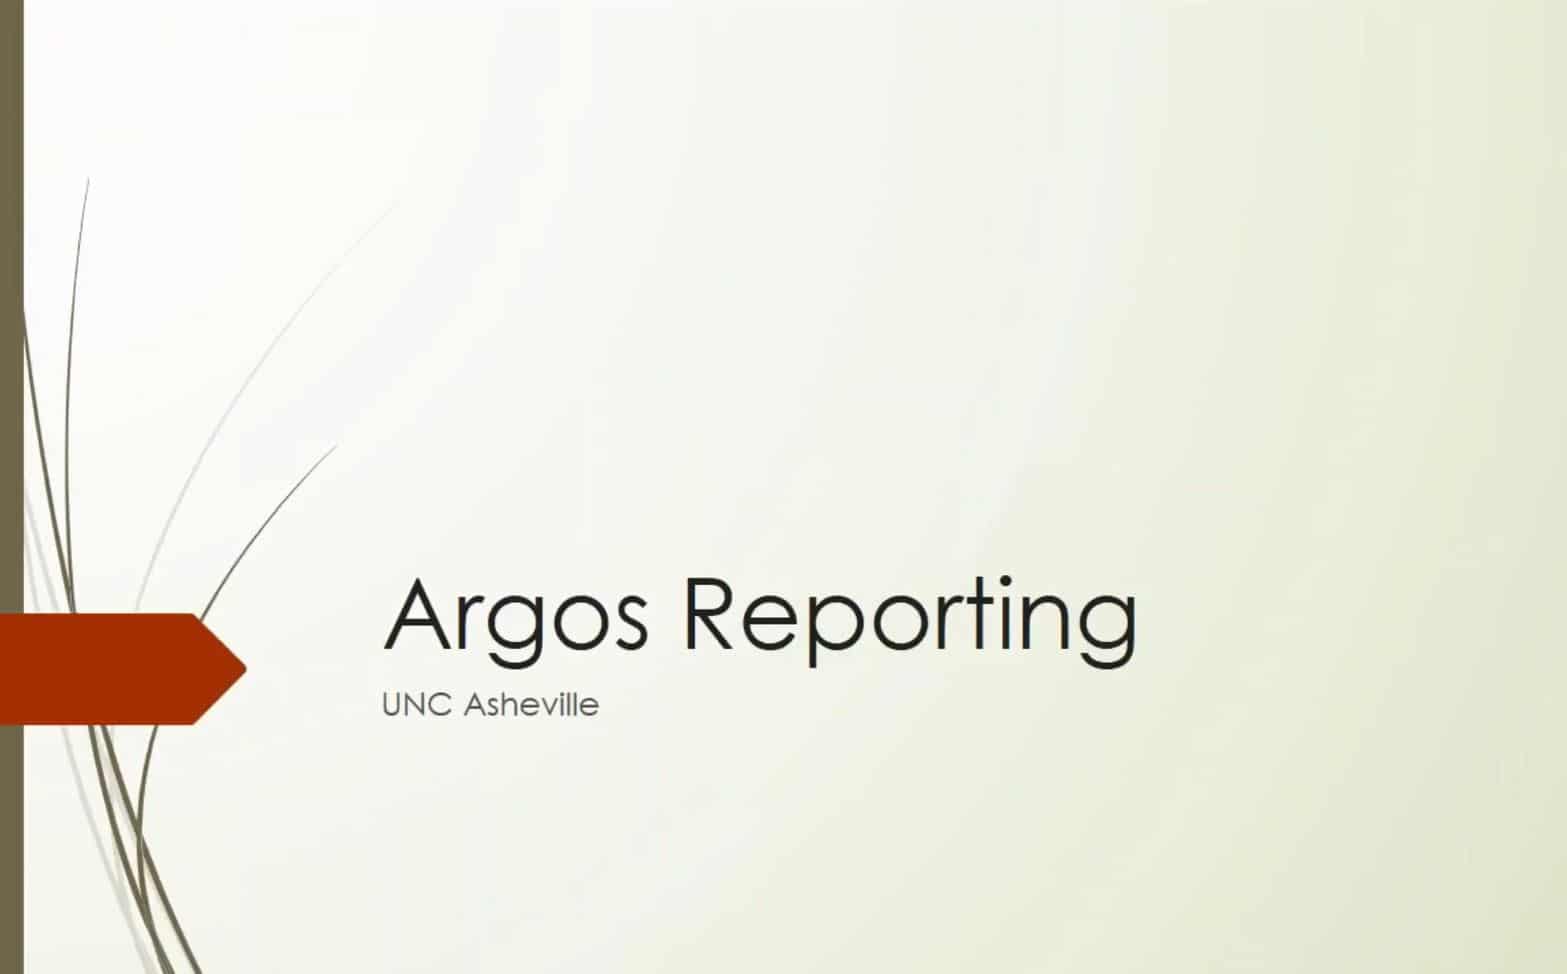 UNC Asheville Improves Enterprise Reporting with Evisions Argos